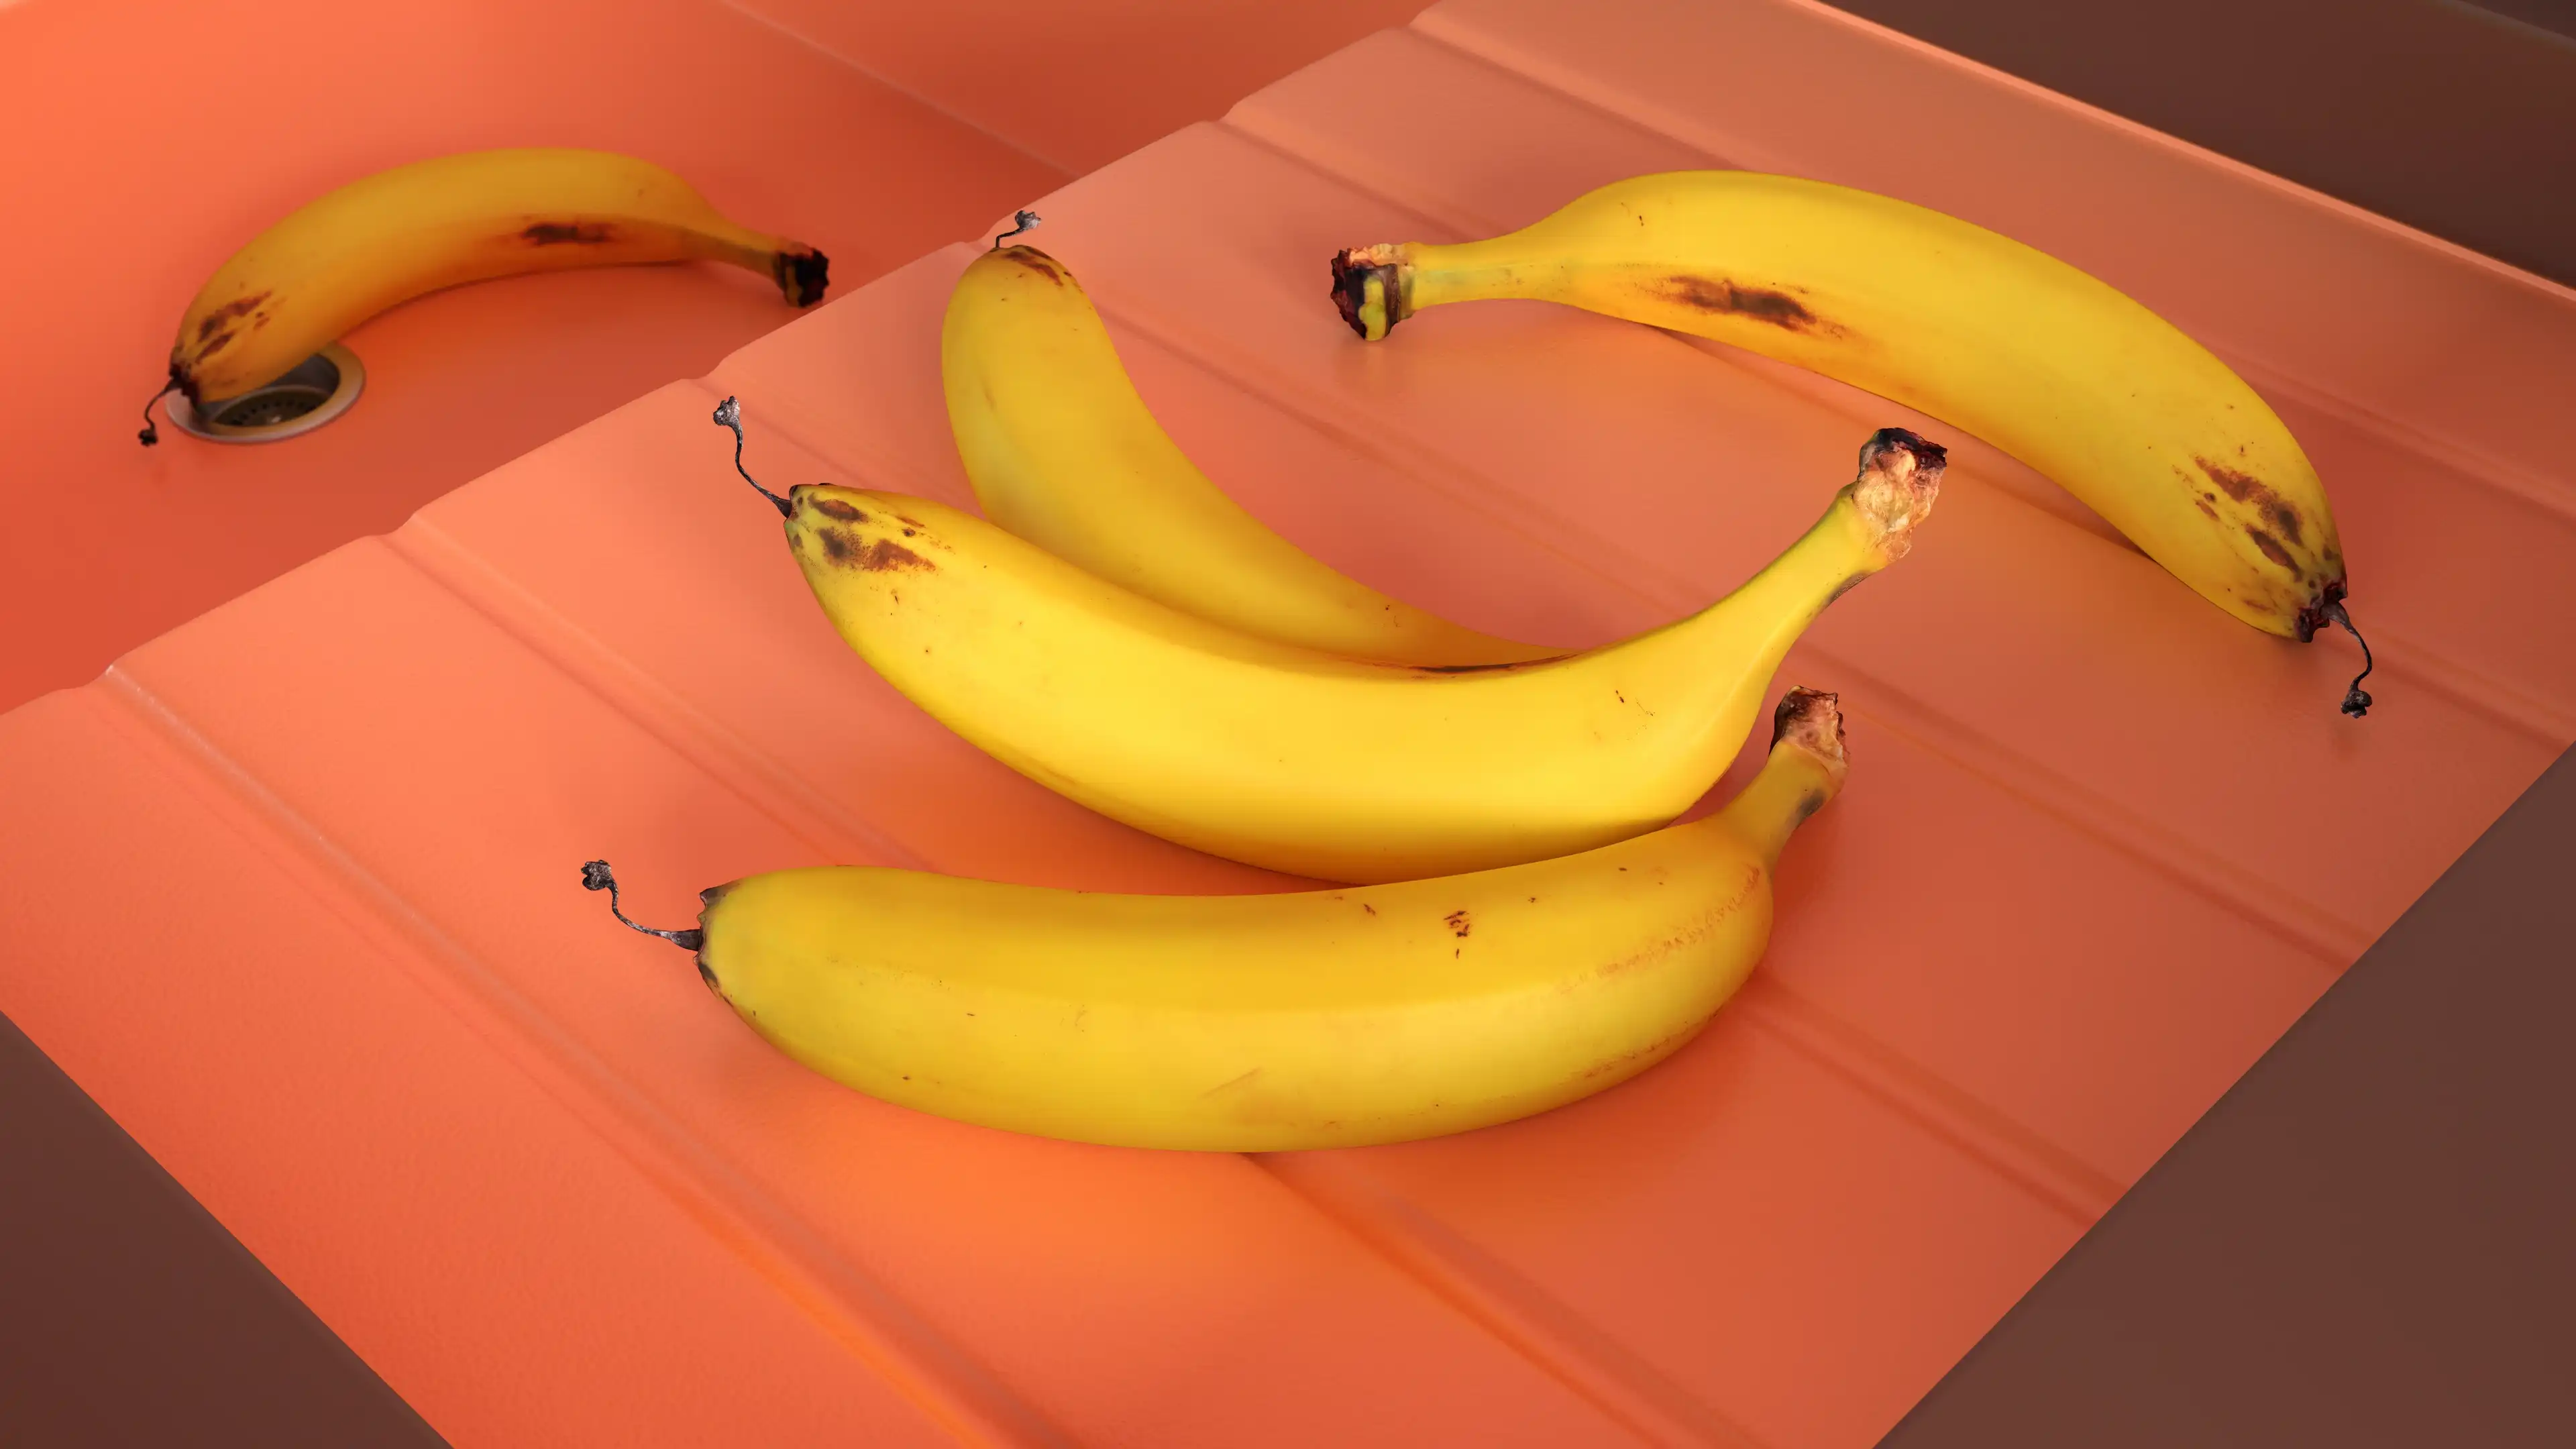 five yellow bananas in the kitchen sink realistically 3d rendered in 3ds max and v-ray